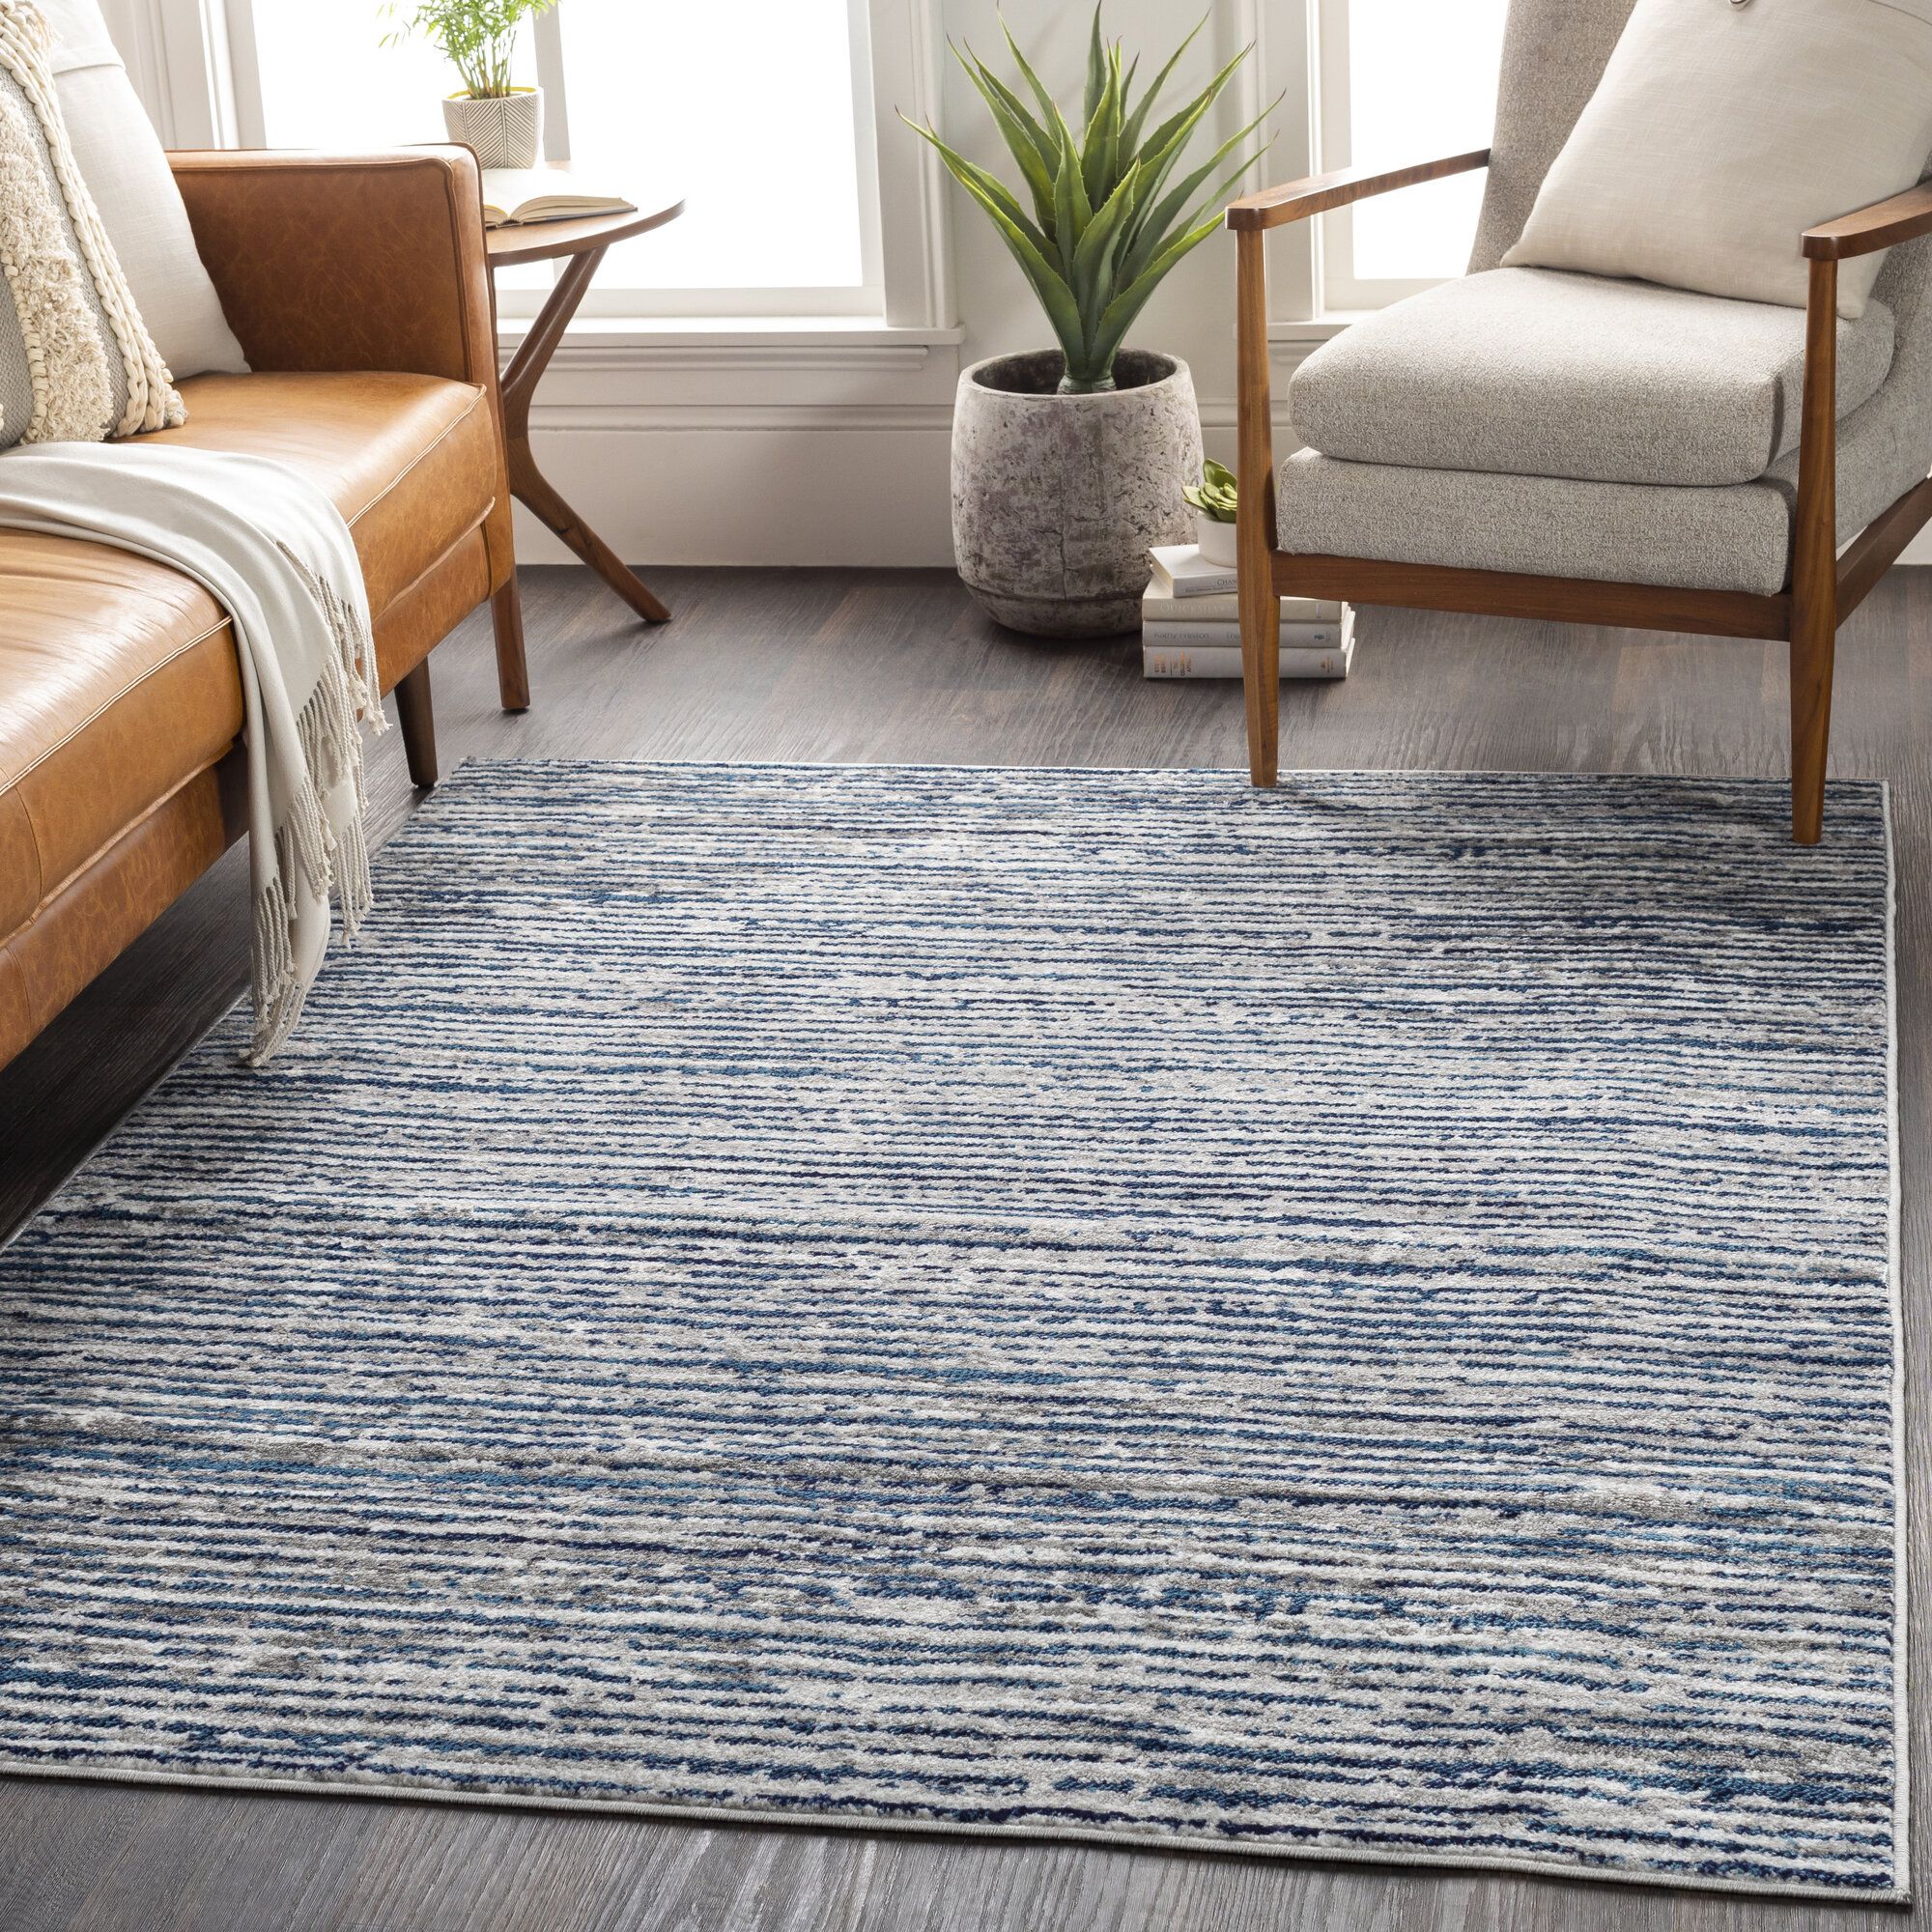 Wayfair | Coastal Round Area Rugs You'Ll Love In 2023 With Coastal Indoor Rugs (View 3 of 15)